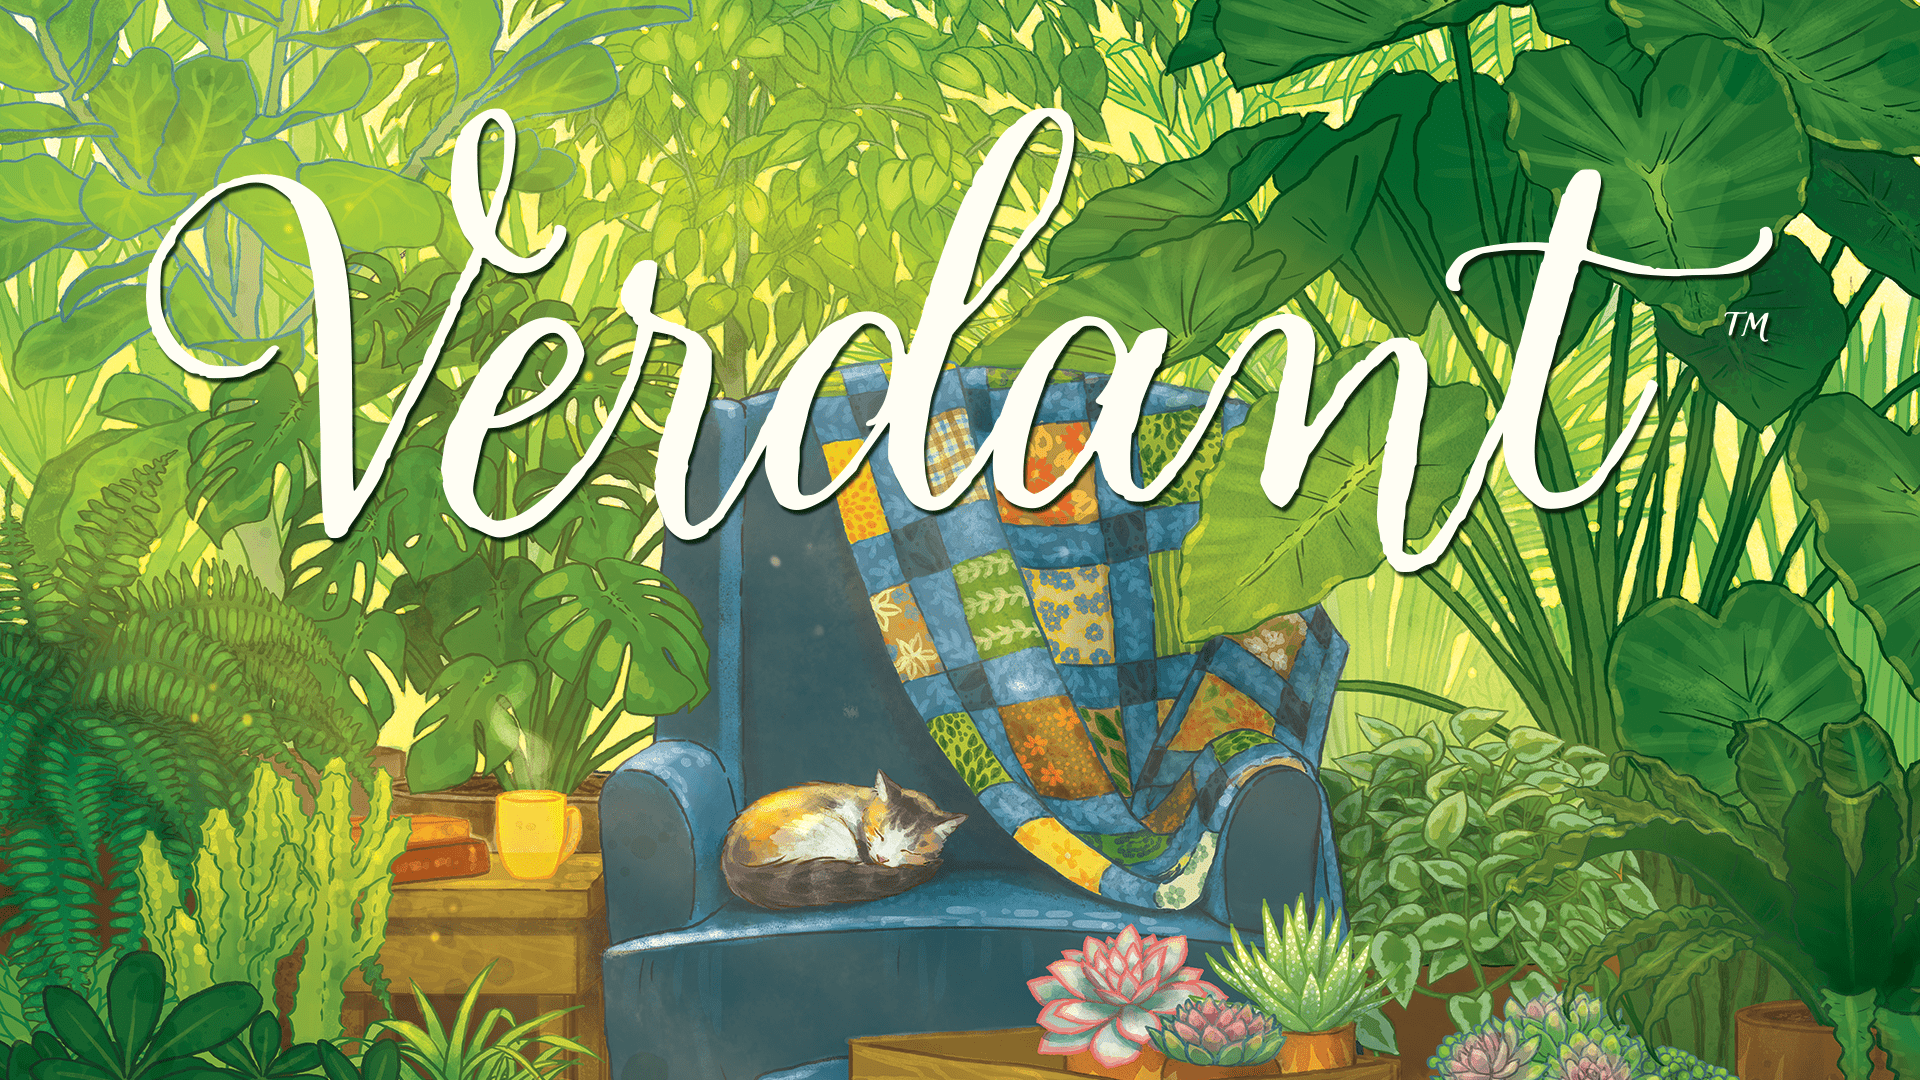 Verdant logo over a section of the cover, the cover has a blue sofa with a quilt and a calico cat sleeping surrounded by a lot of plants